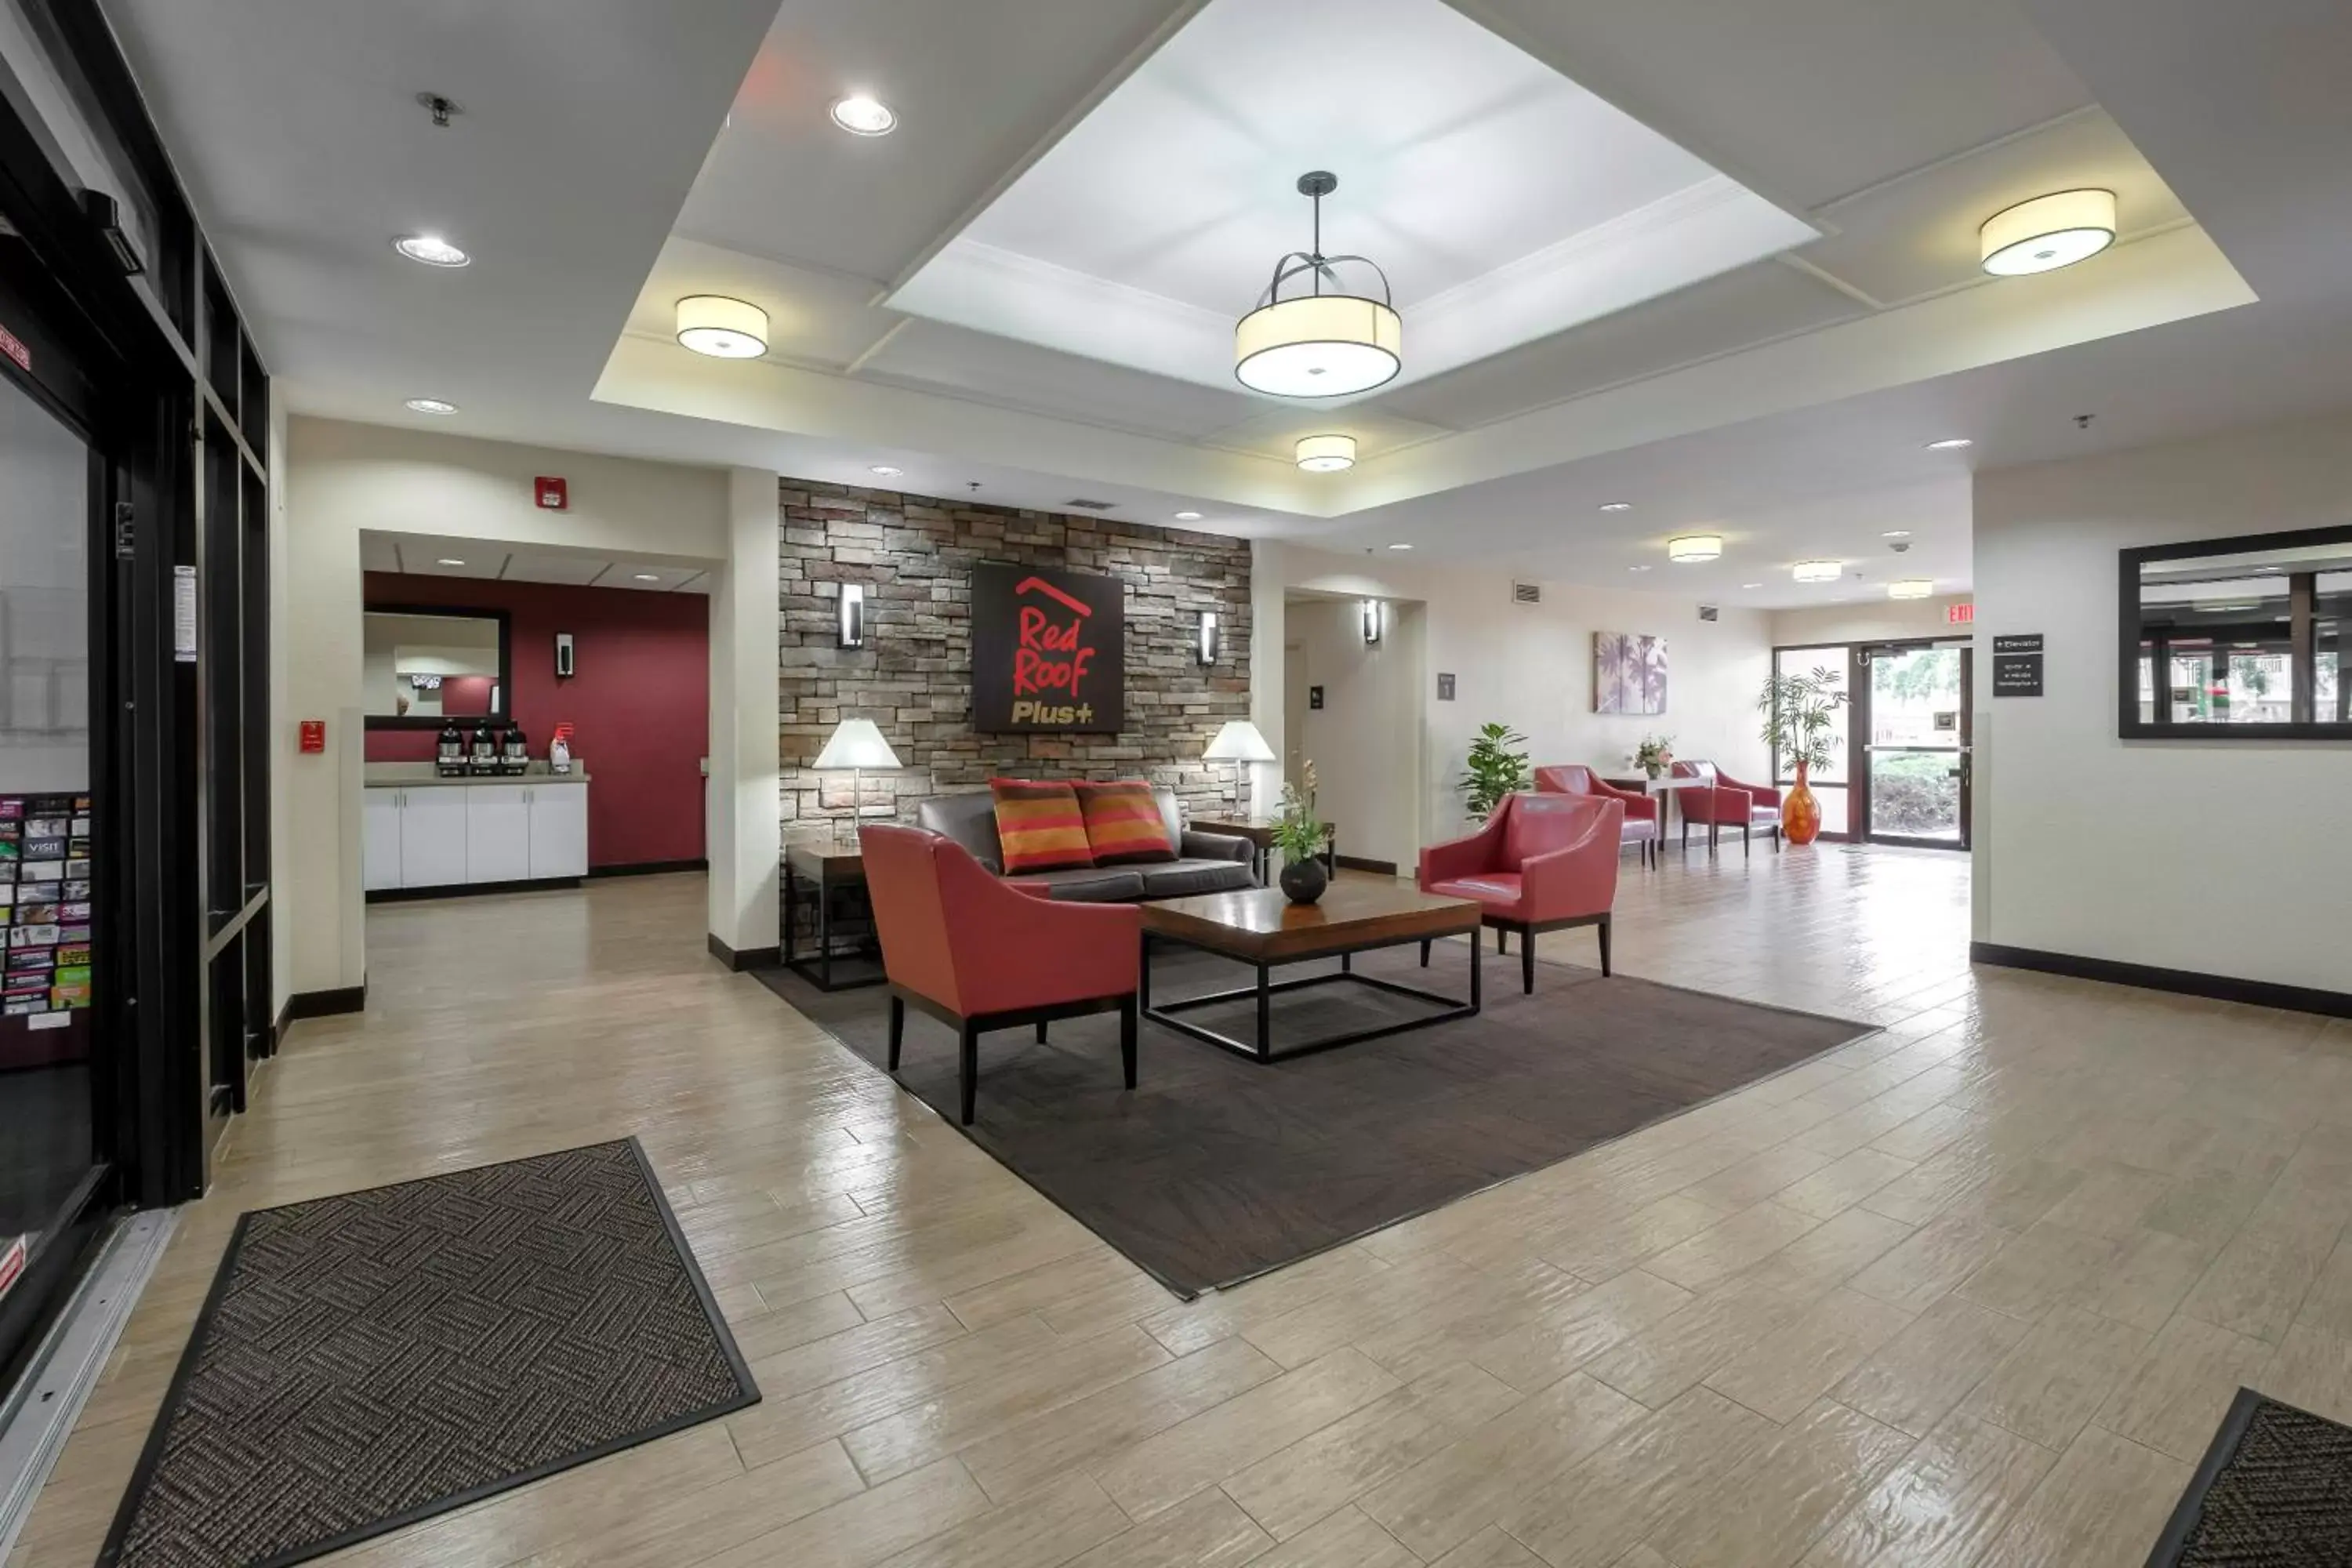 Lobby or reception, Lobby/Reception in Red Roof Inn PLUS + Gainesville